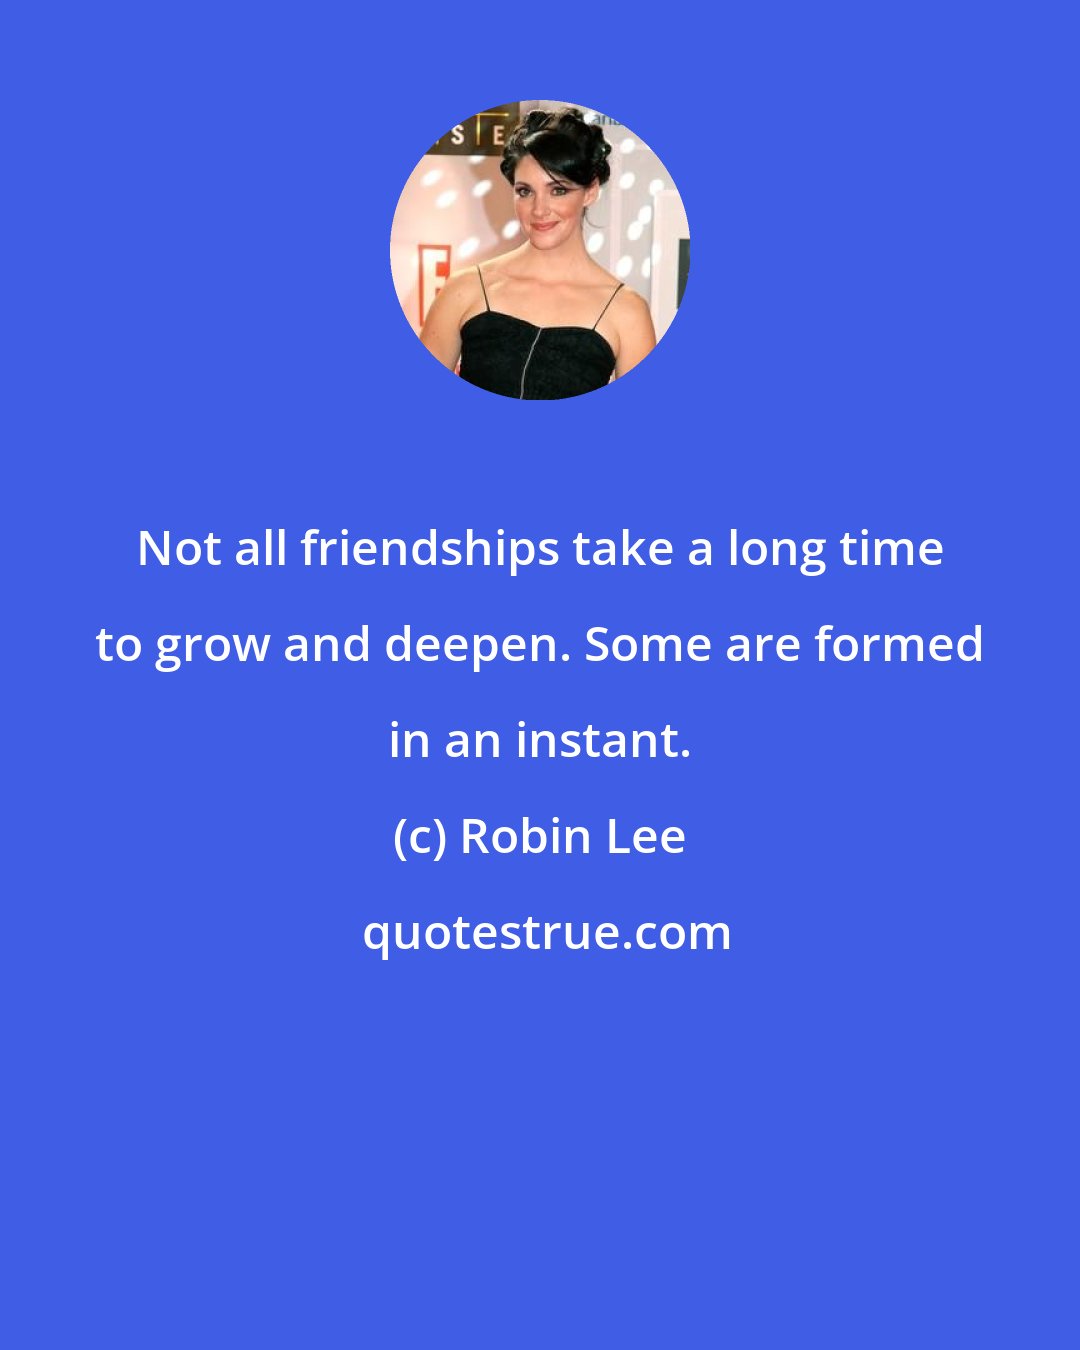 Robin Lee: Not all friendships take a long time to grow and deepen. Some are formed in an instant.